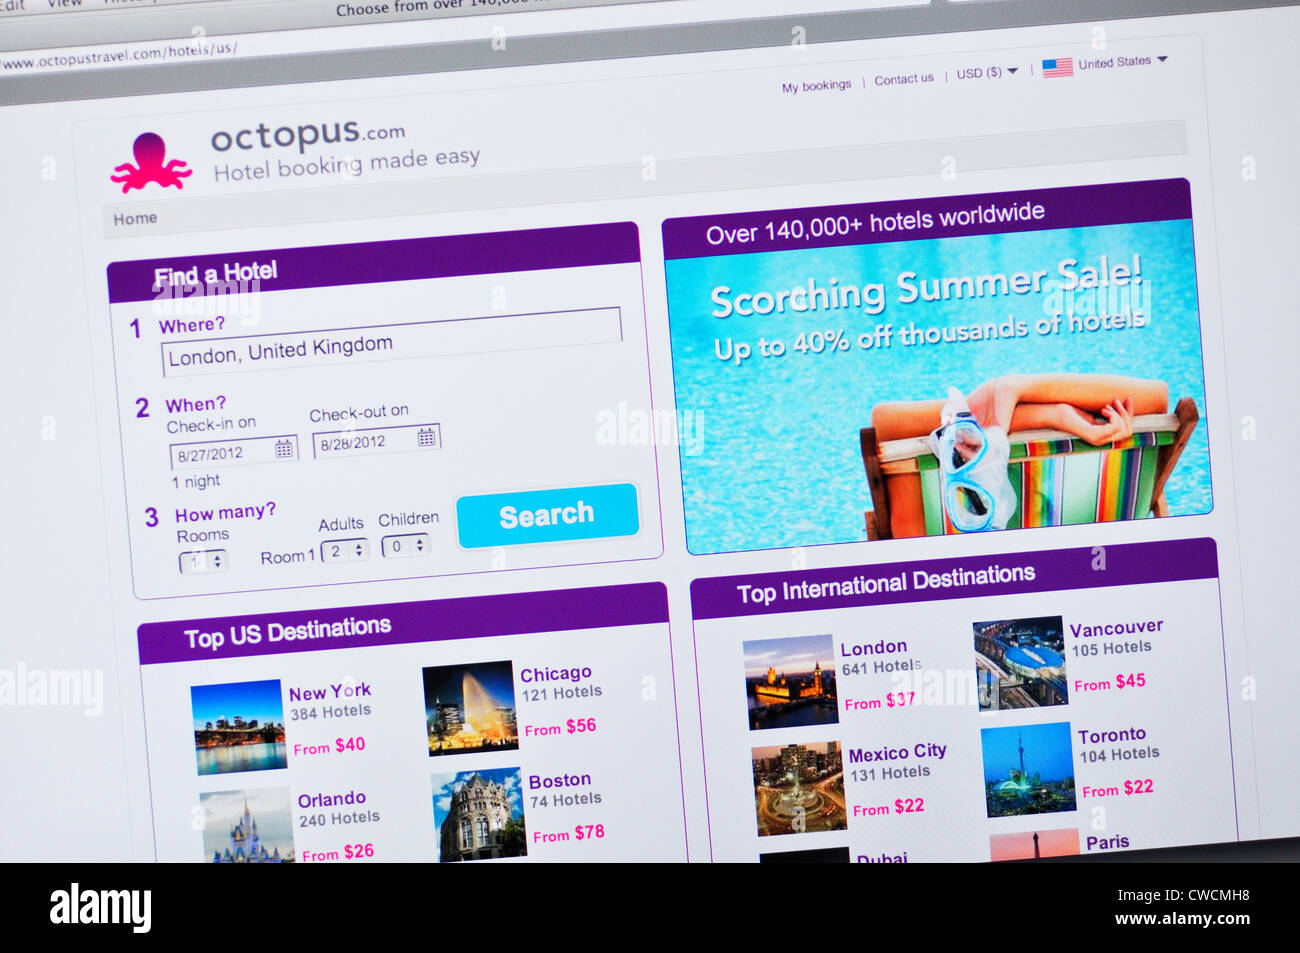 Octopus Travel website - London hotel search Stock Photo